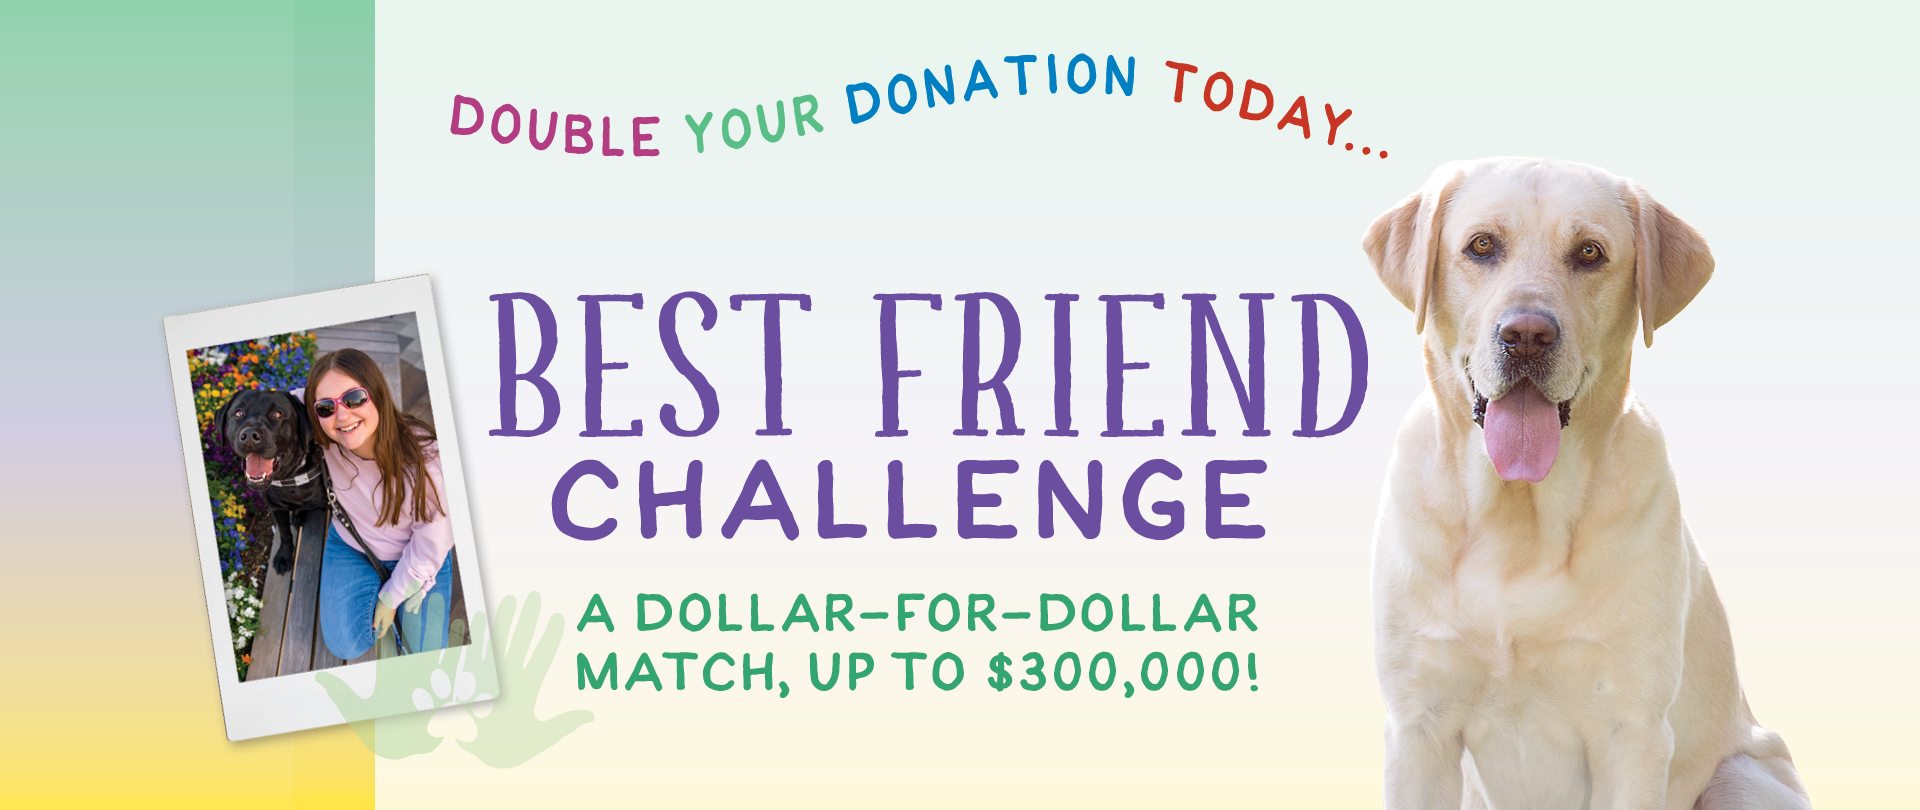 A header image promoting the Best Friends Challenge.